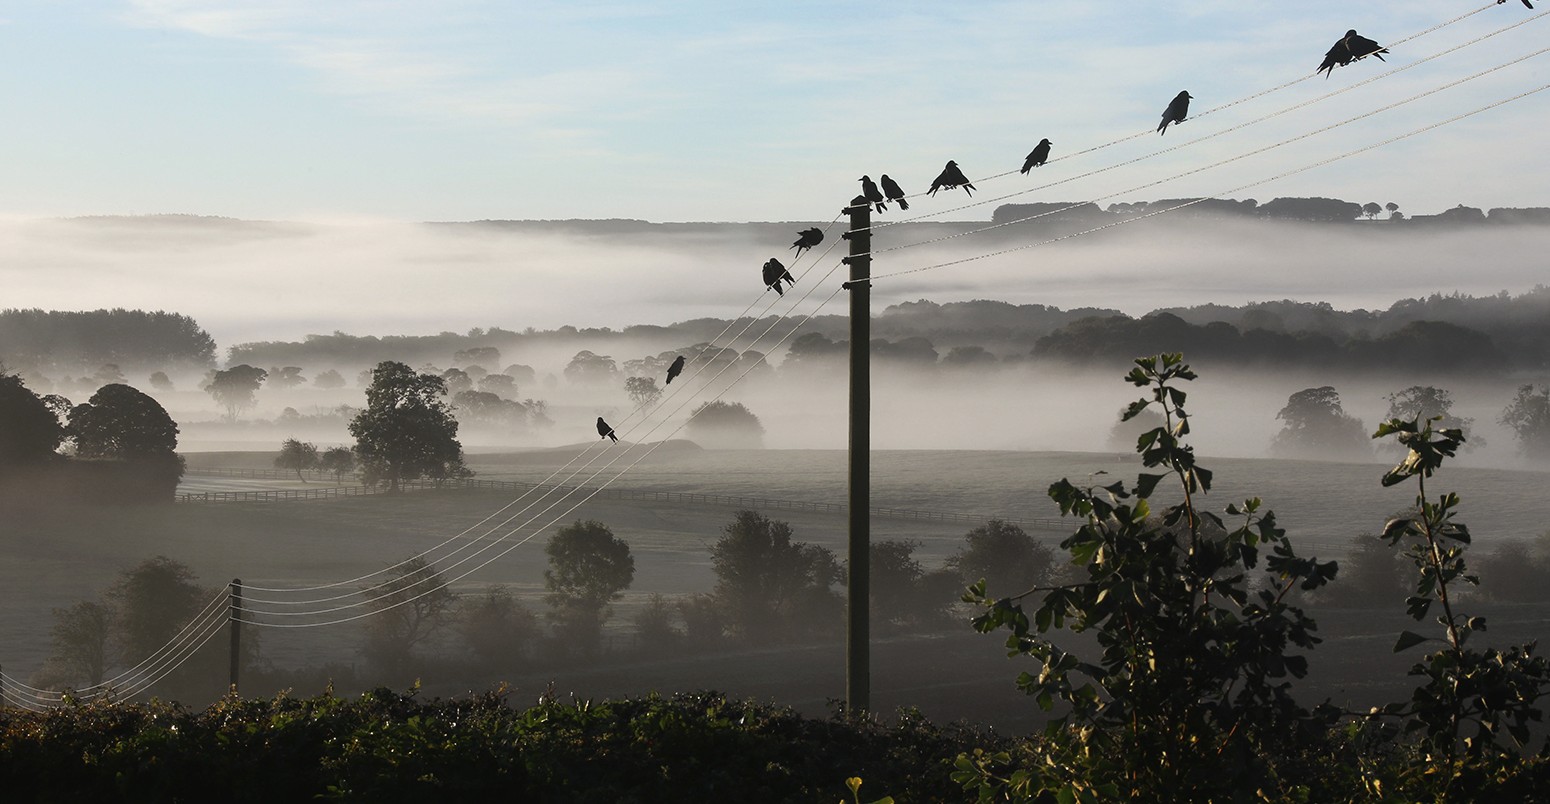 Birds sit on electricity pylons in the early morning mist in the North Yorkshire countryside in the United Kingdom.